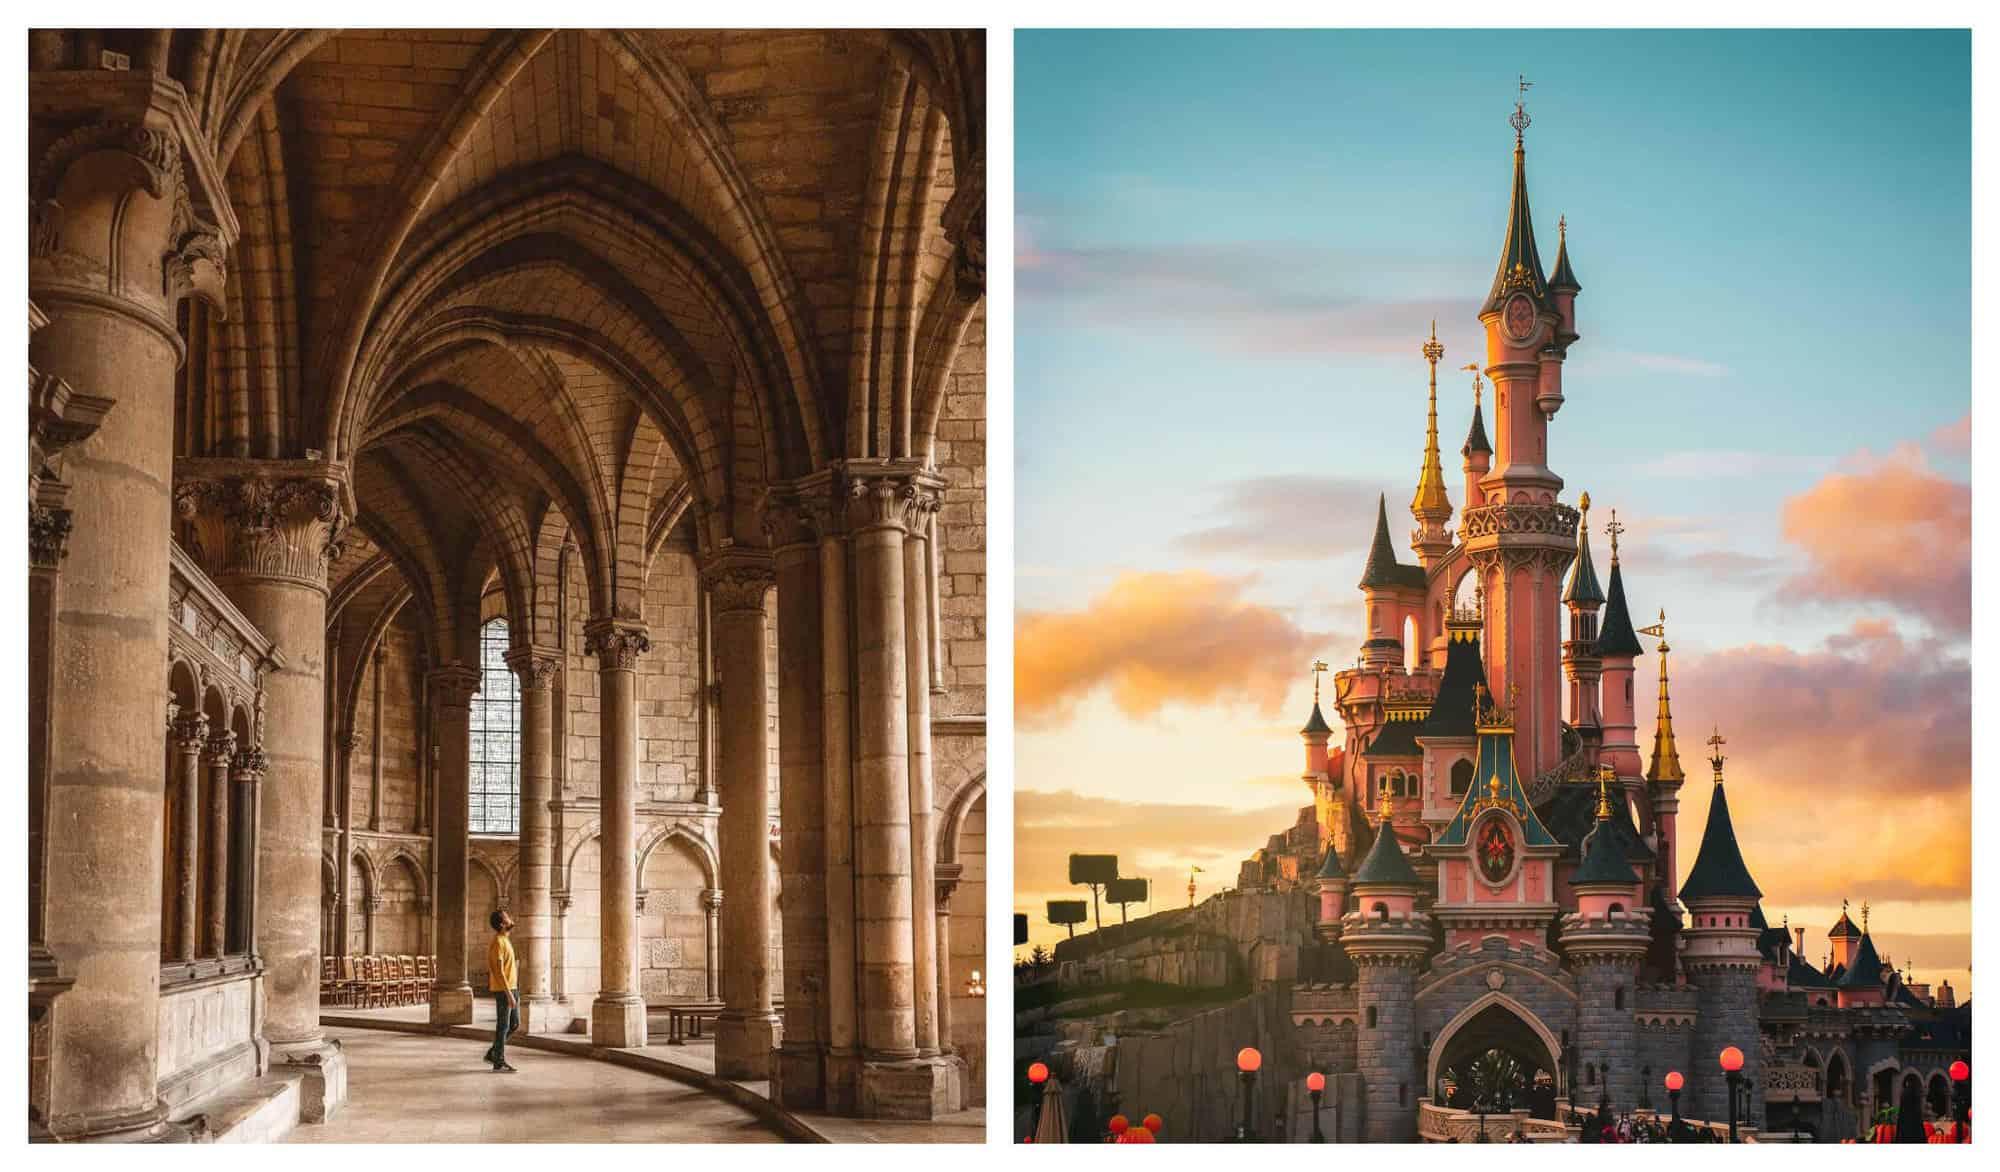 Left: A man in yellow shirt gazes at the ceiling inside of a gothic church. Right: A fairy tale castle in pink and blue at Disneyland.